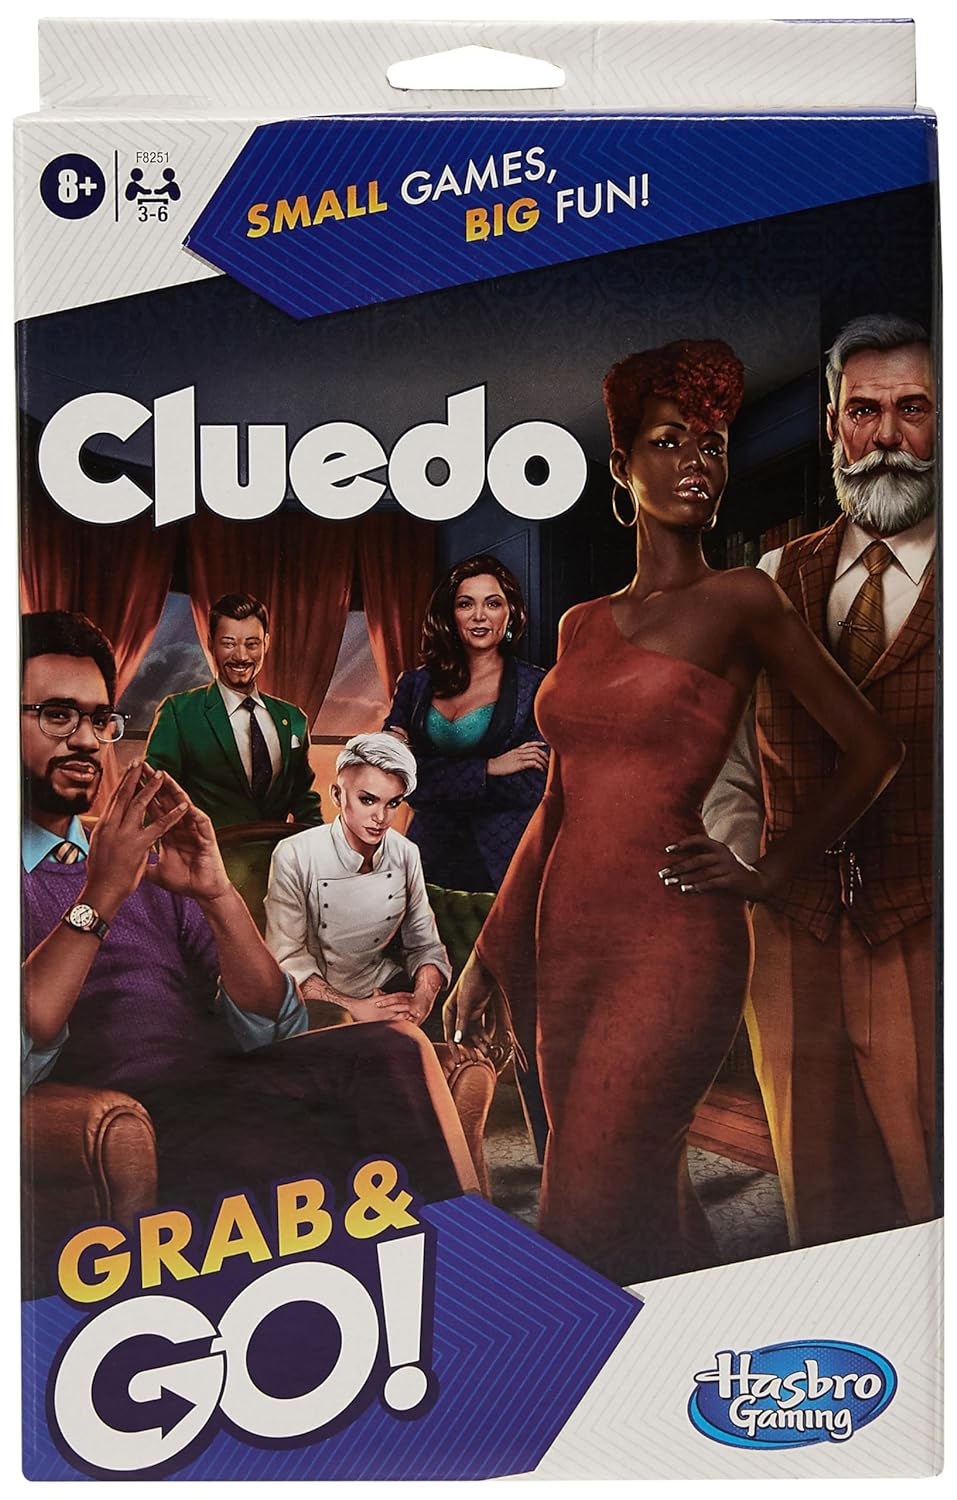 Hasbro Gaming Cluedo Grab and Go Portable Travel Game for 3-6 Players Ages 8 and Up